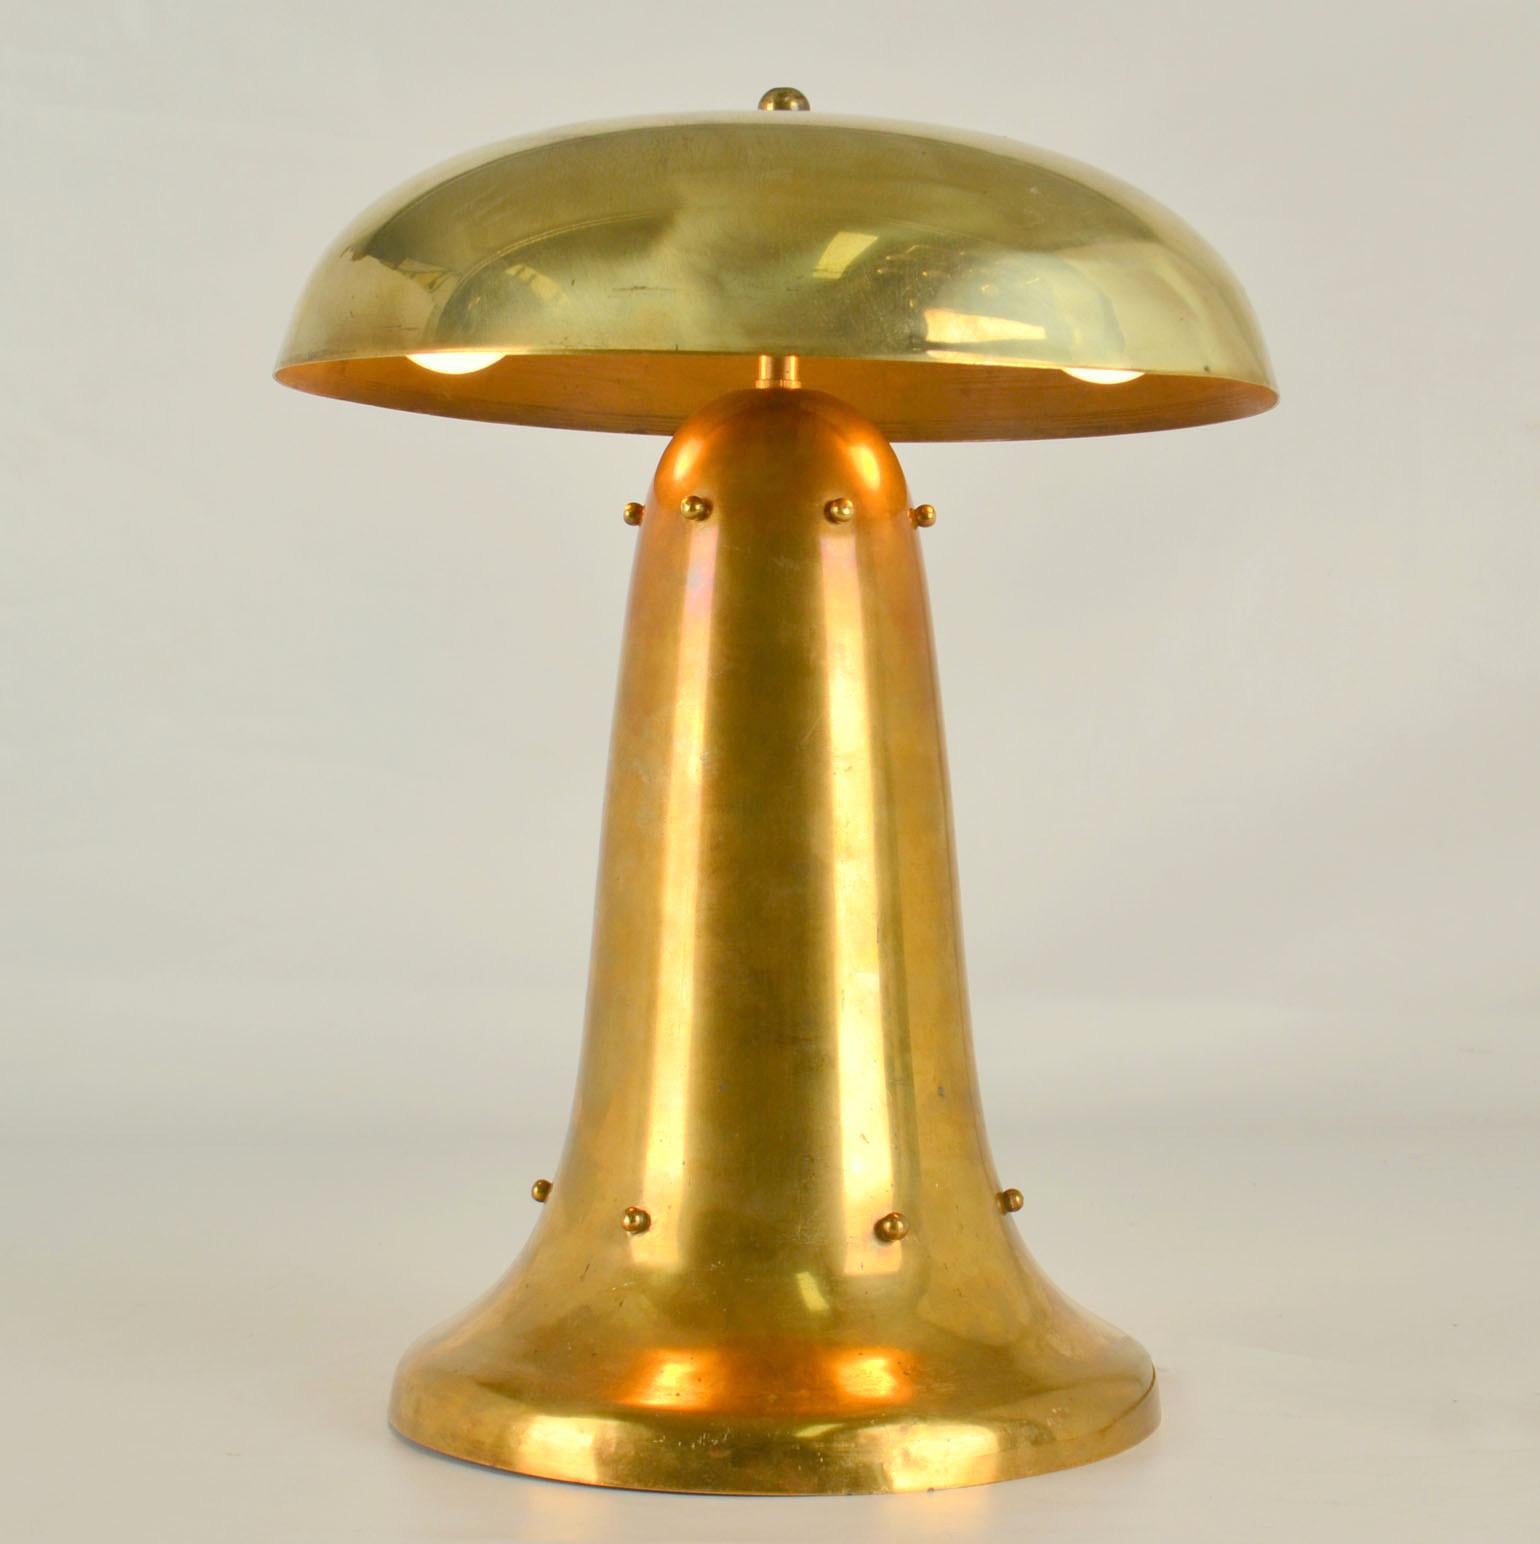 Modernist Art Deco table or desk curvaceous lamp in the shape of a mushroom with decorative brass beads is extraordinary rare example of Dutch design in the 1920's. It is of the machine age. in the style of early Daalderop lamps with their fluent